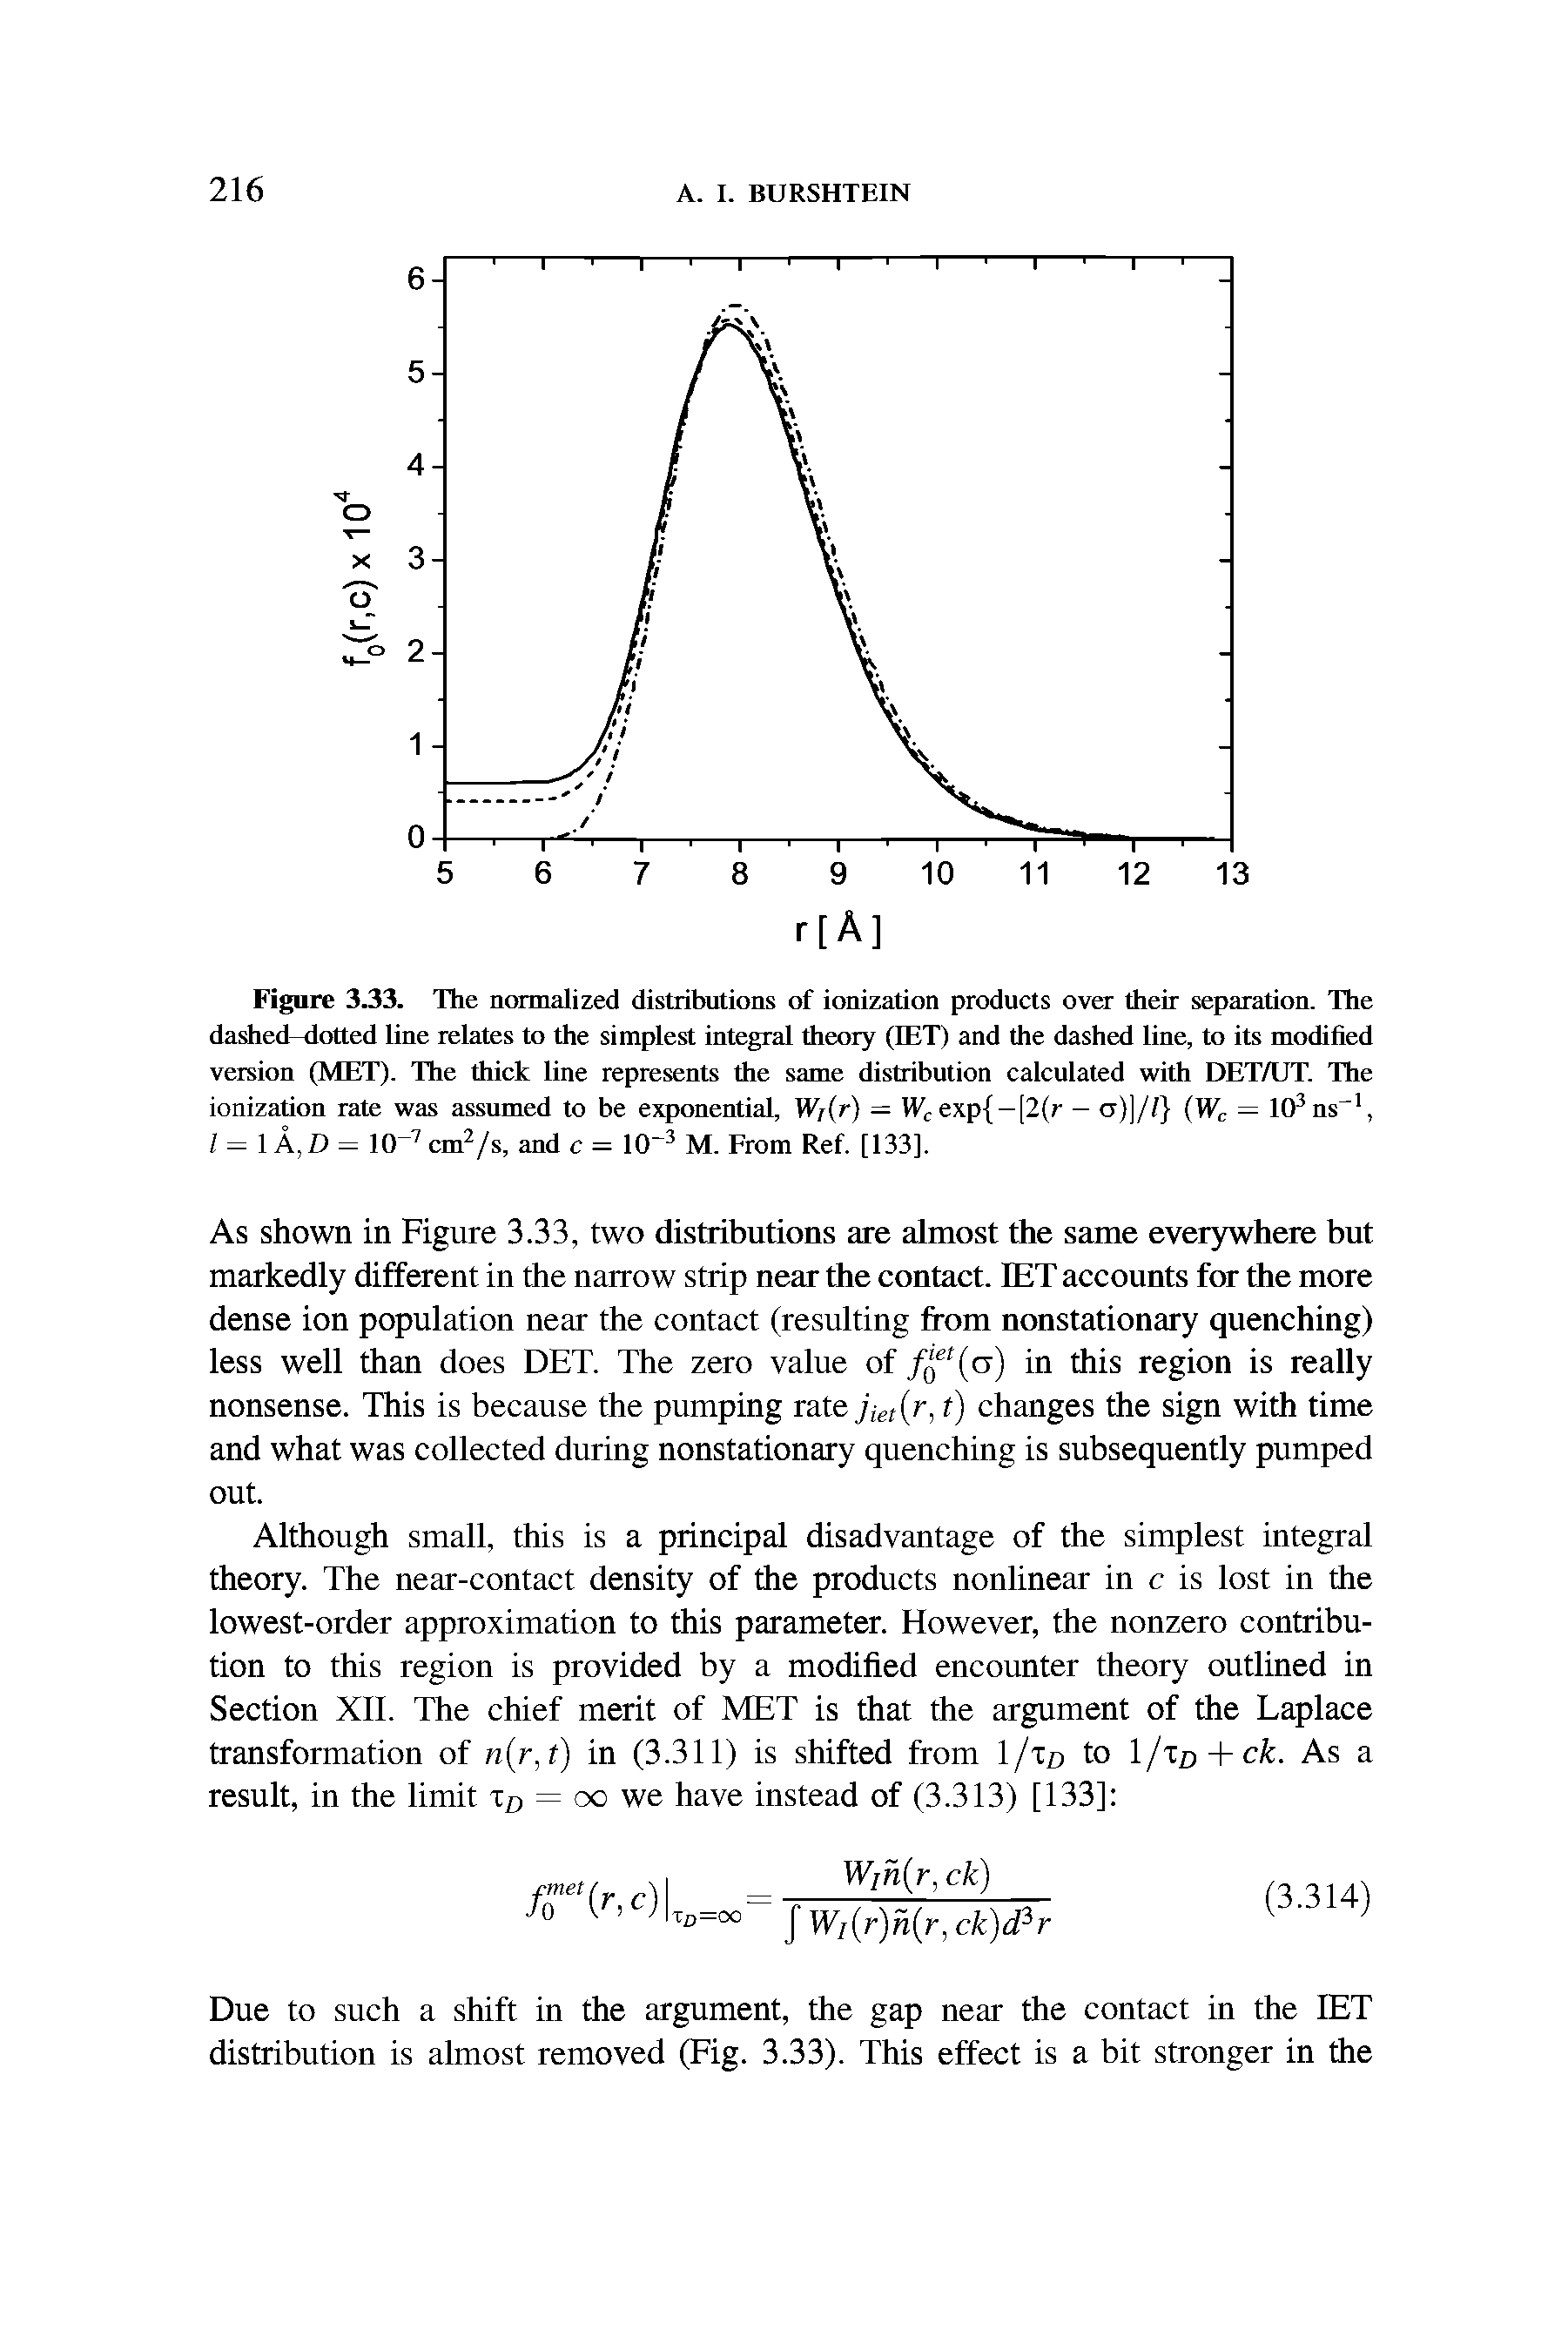 Figure 3.33. The normalized distributions of ionization products over their separation. The dashed-dotted line relates to the simplest integral theory (IET) and the dashed line, to its modified version (MET). The thick line represents the same distribution calculated with DET/UT. The ionization rate was assumed to be exponential, Wj(r) = Wc exp -[2(r - a)]// (Wc = 103ns, l = 1 A,D = 10 7 cm2/s, and c = 10 3 M. From Ref. [133].